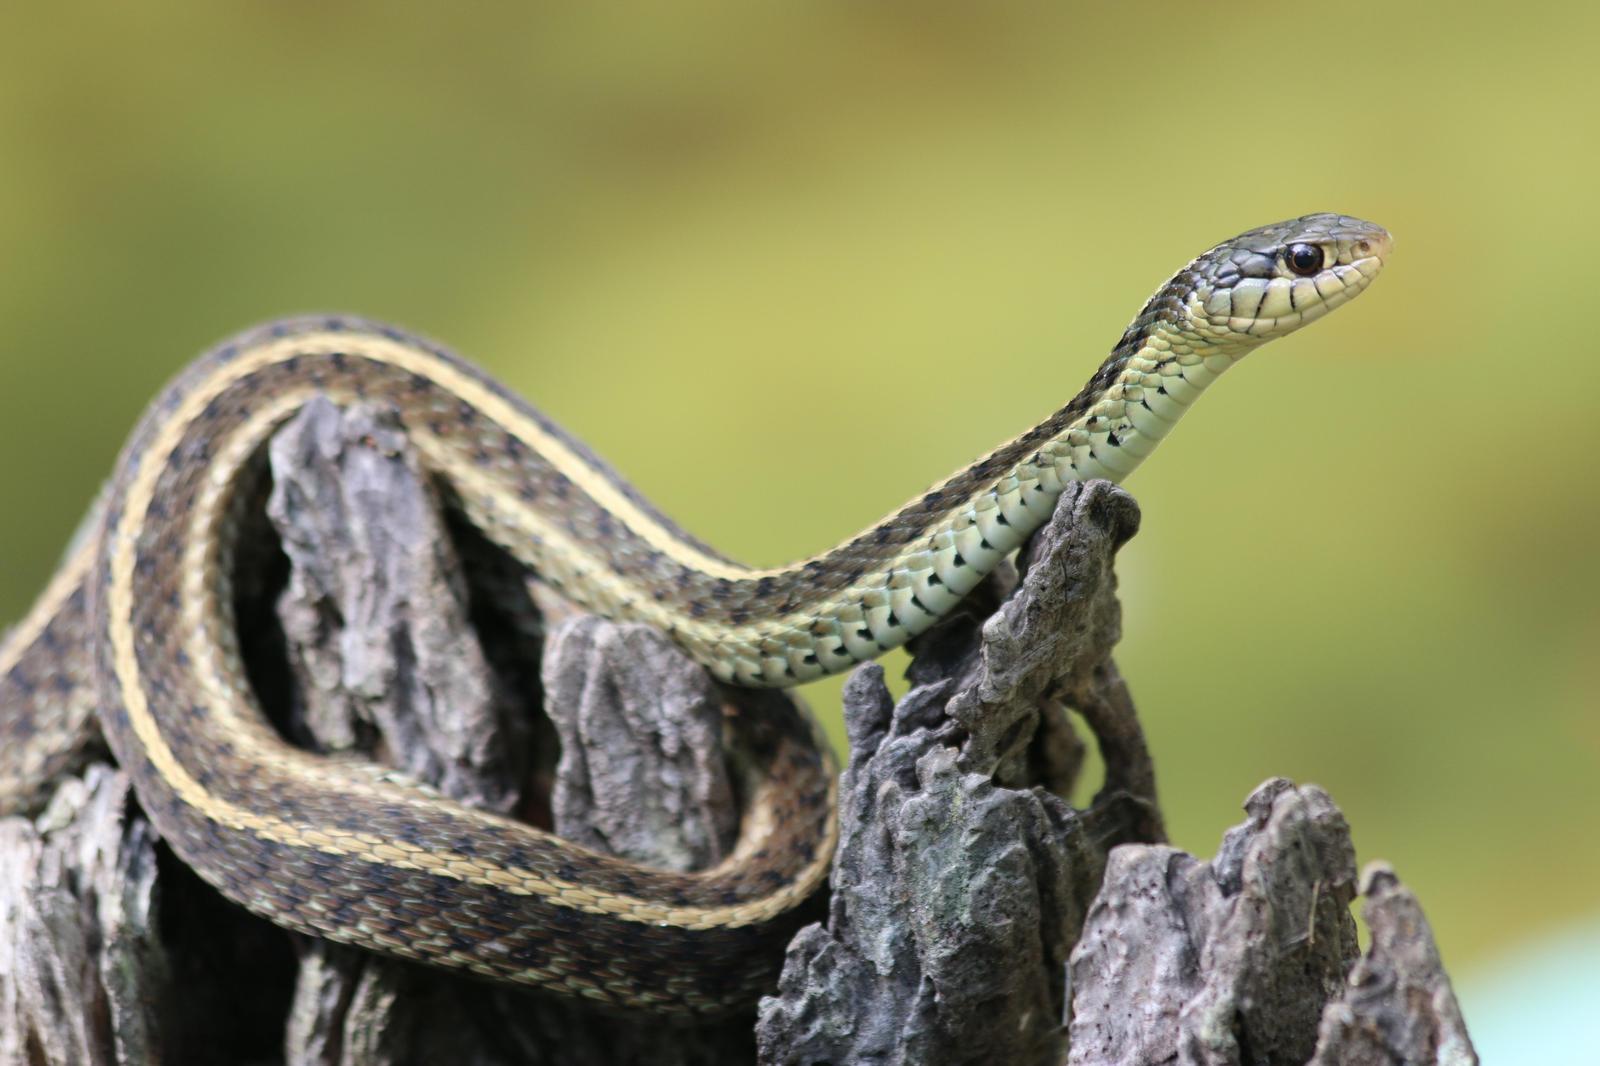 Common Garter Snake Photo by Peter Bergeson